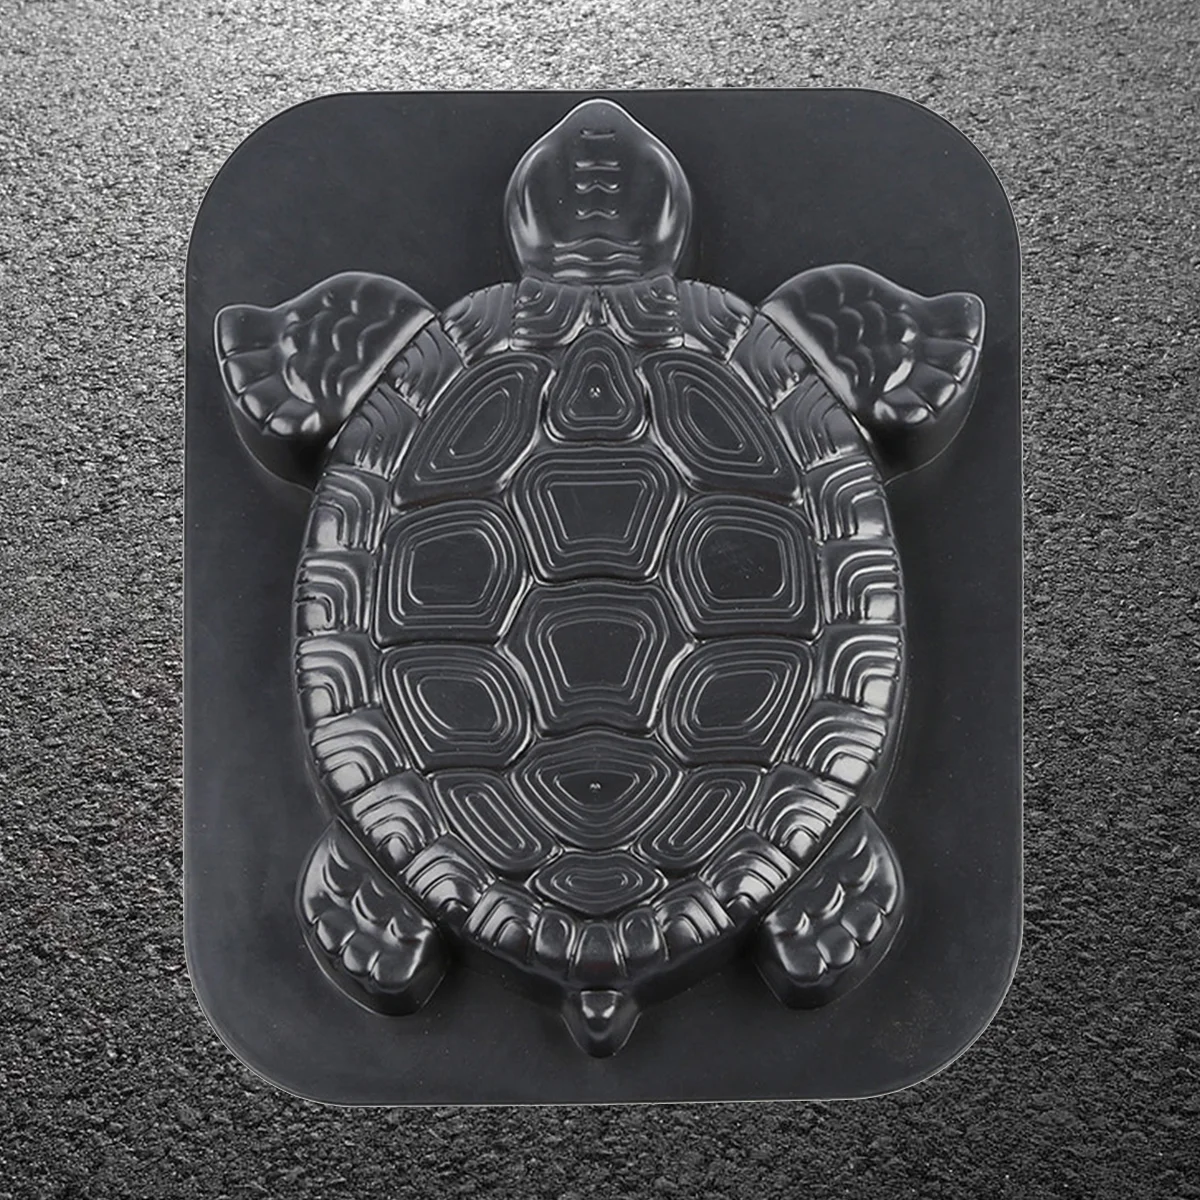 

Turtle Path Maker Mold Manually Paving Concrete Molds Stepping Stone Road Making Tool (Black) Cement